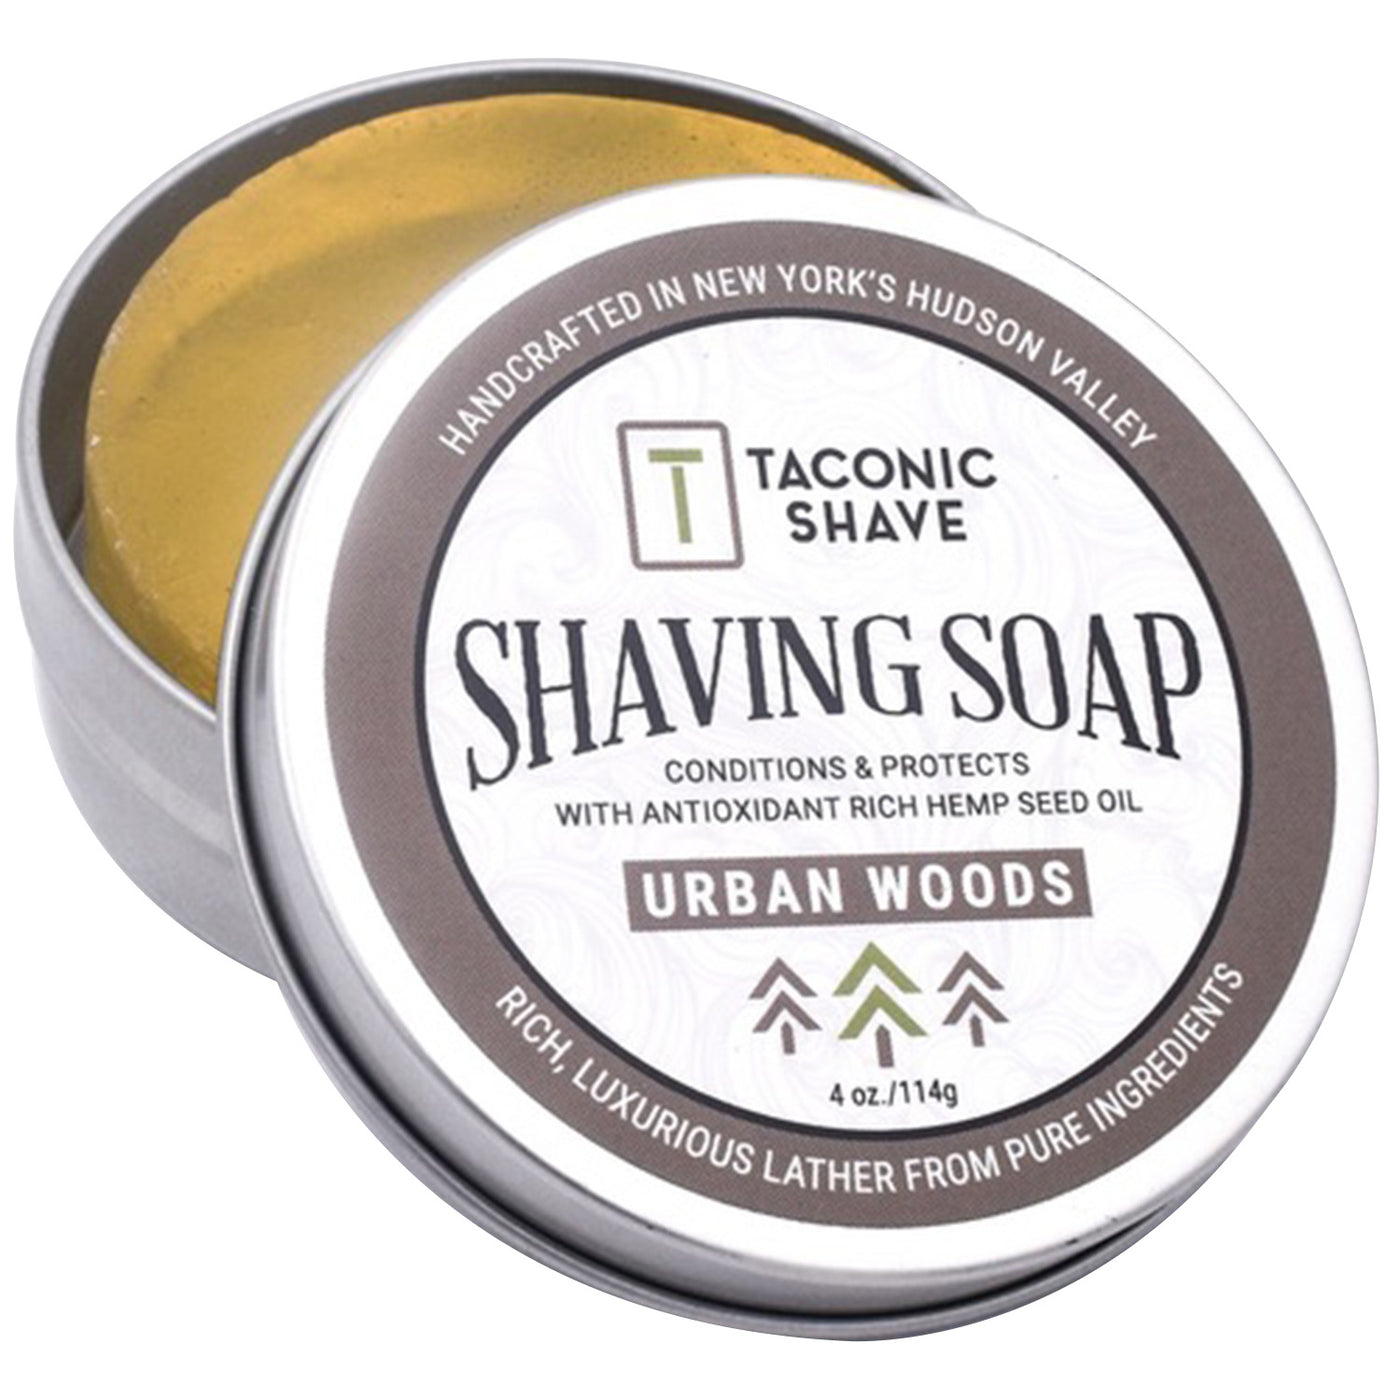  Taconic Shave Hemp & Urban Woods Shave Soap by Taconic Shave sold by Naked Armor Razors